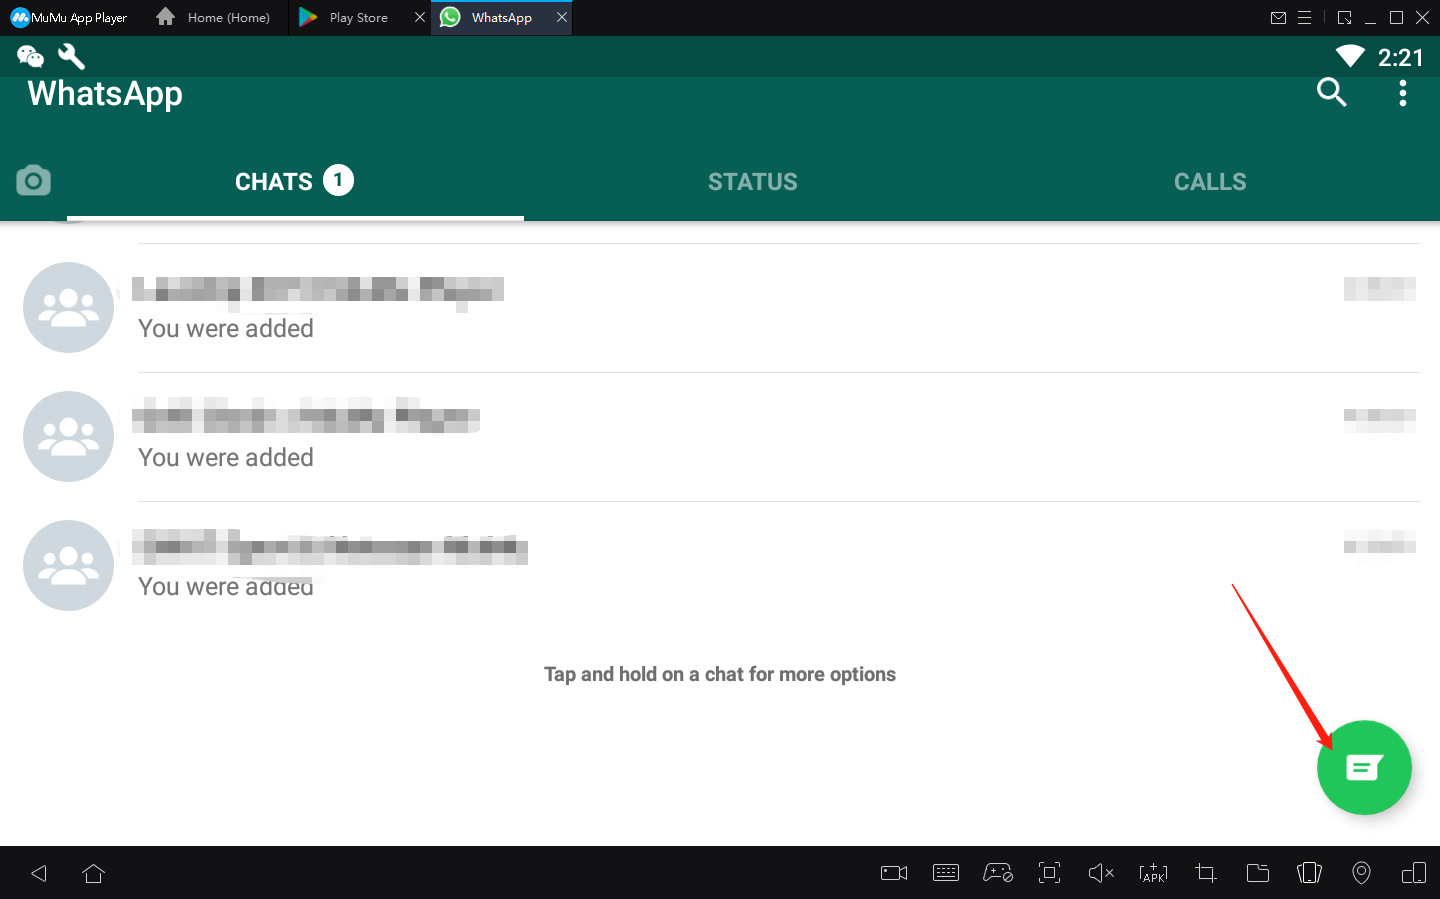 How to log in to WhatsApp with MuMu Player on PC7